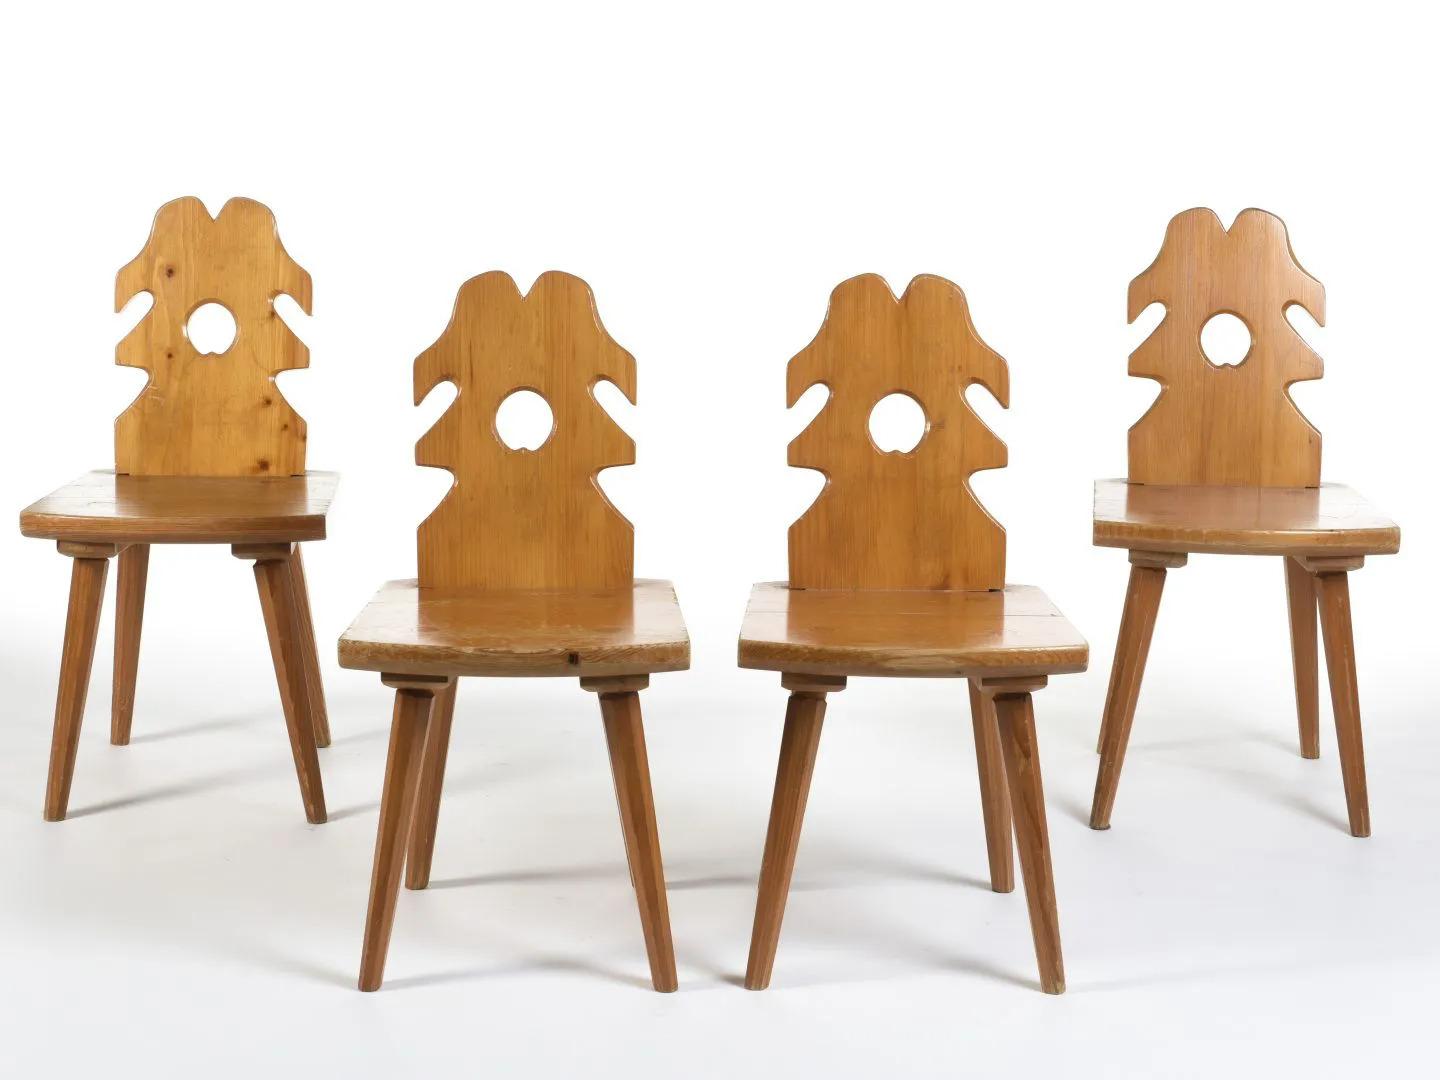 Mid-20th Century 4 Brutalist Chairs in pine, circa 1950-1960